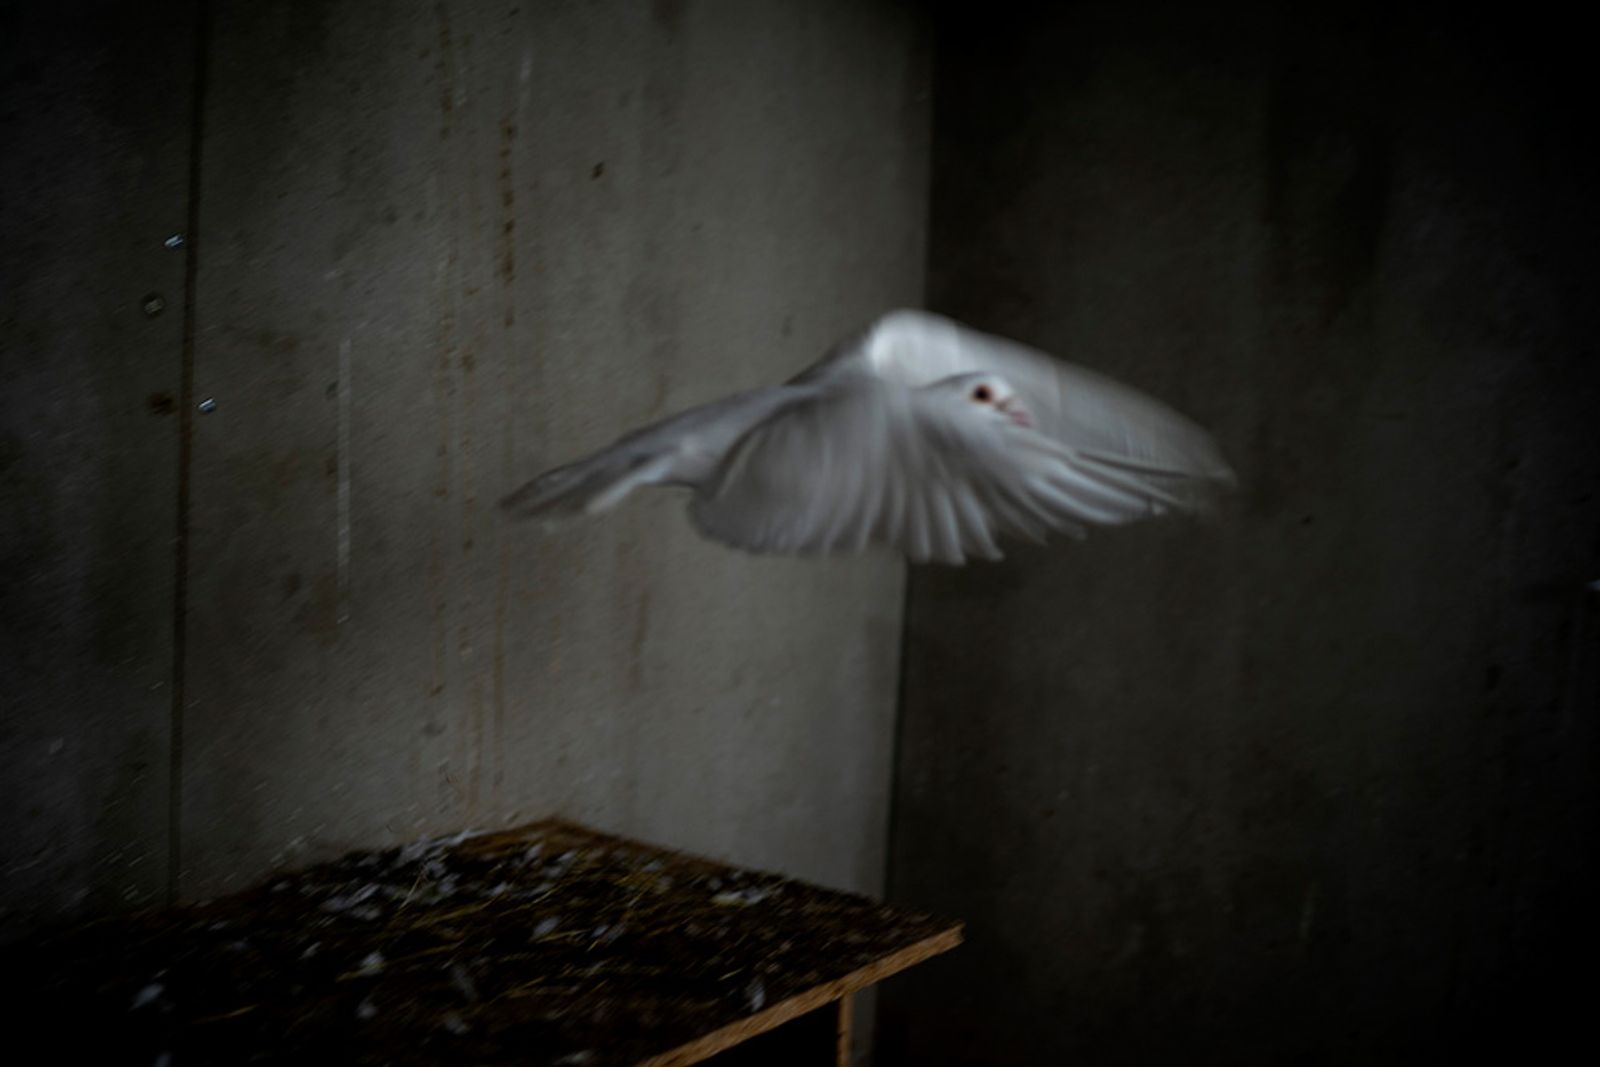 © Nik Roche - Image from the The Budgie Died Instantly photography project